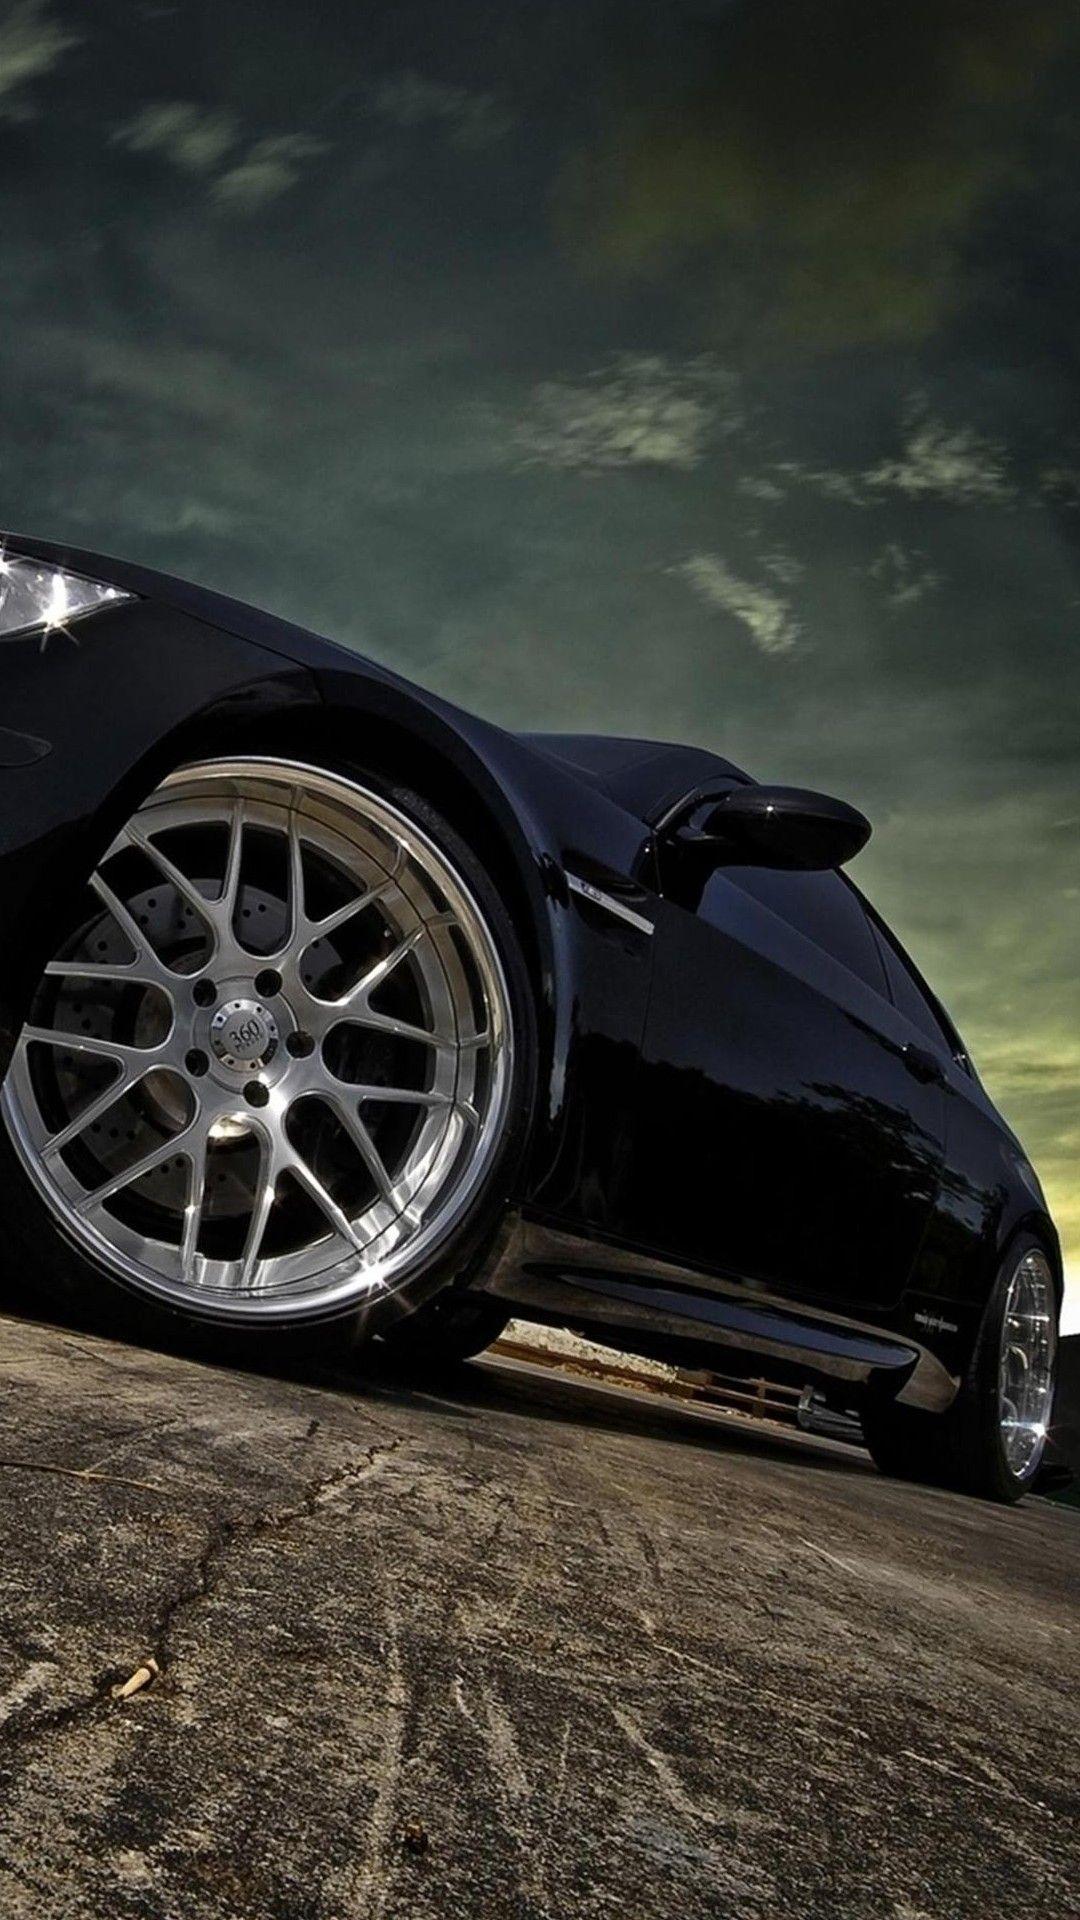 Cars with Rims Wallpaper. Awesome Cars